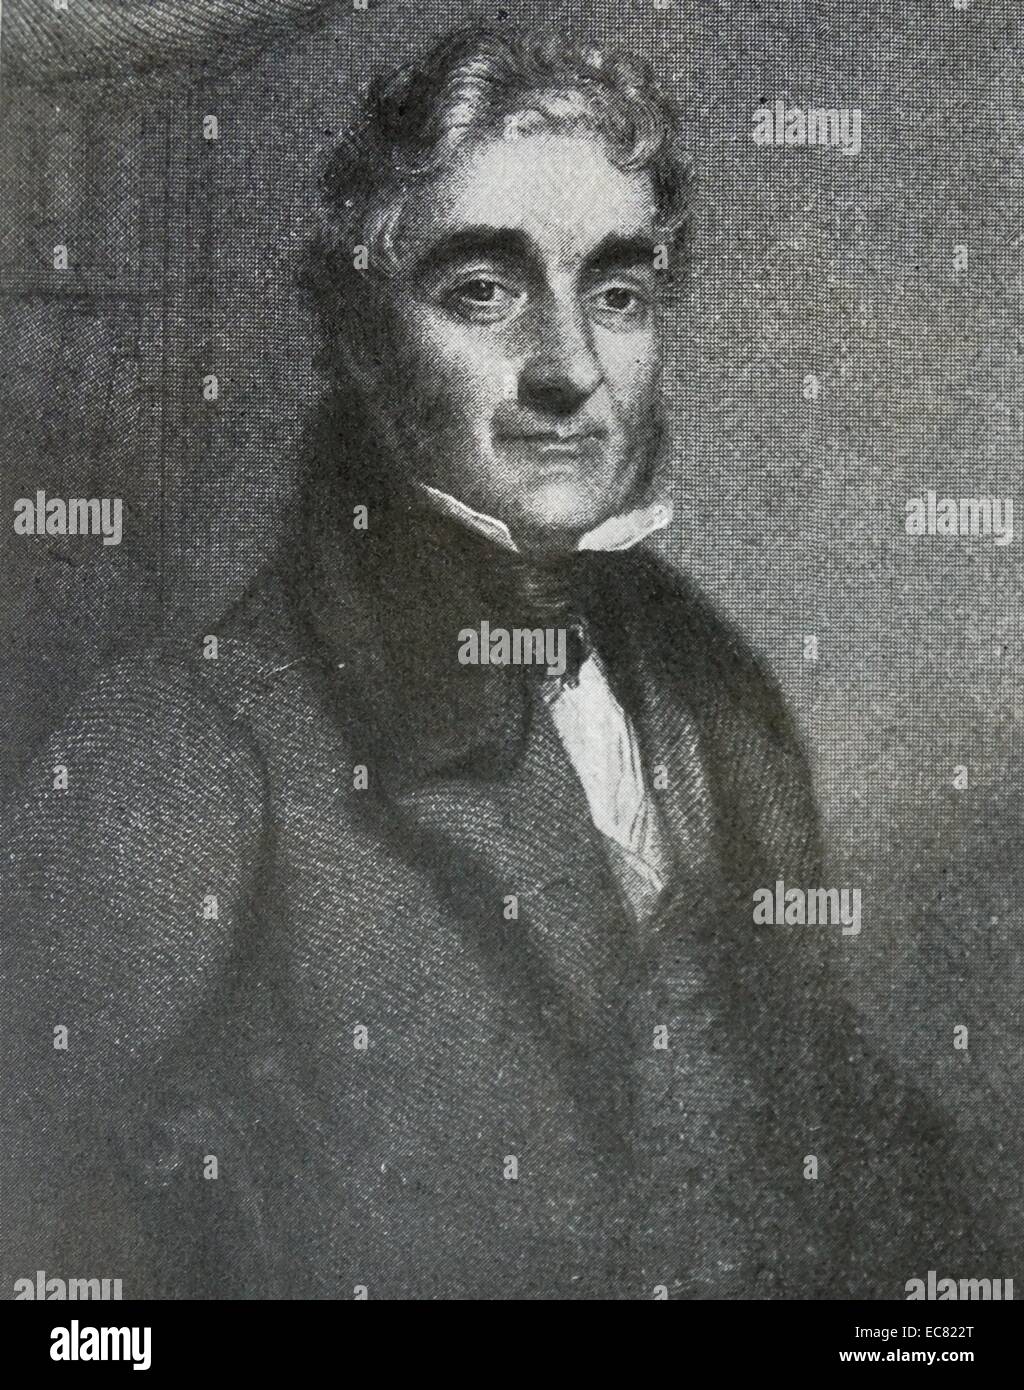 Benjamin Travers (3 April 1783 – 6 March 1858) was a British surgeon. He was appointed surgeon to the London infirmary for diseases of the eye. Stock Photo